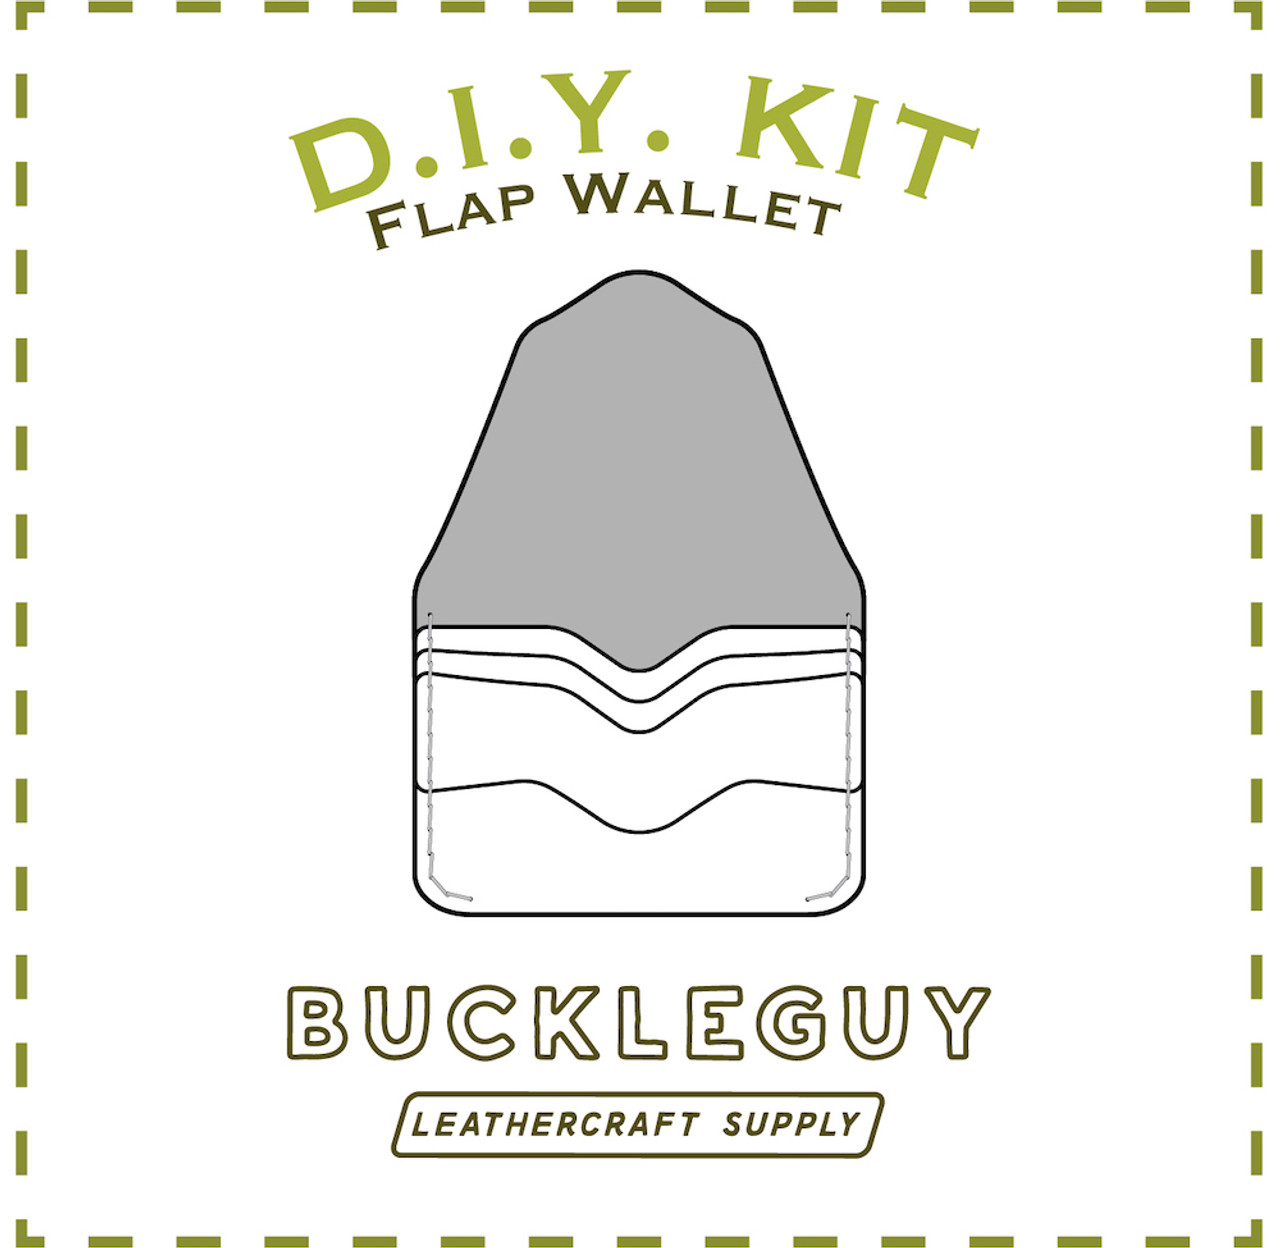 Free Shipping on Orders overs $100 at Buckleguy